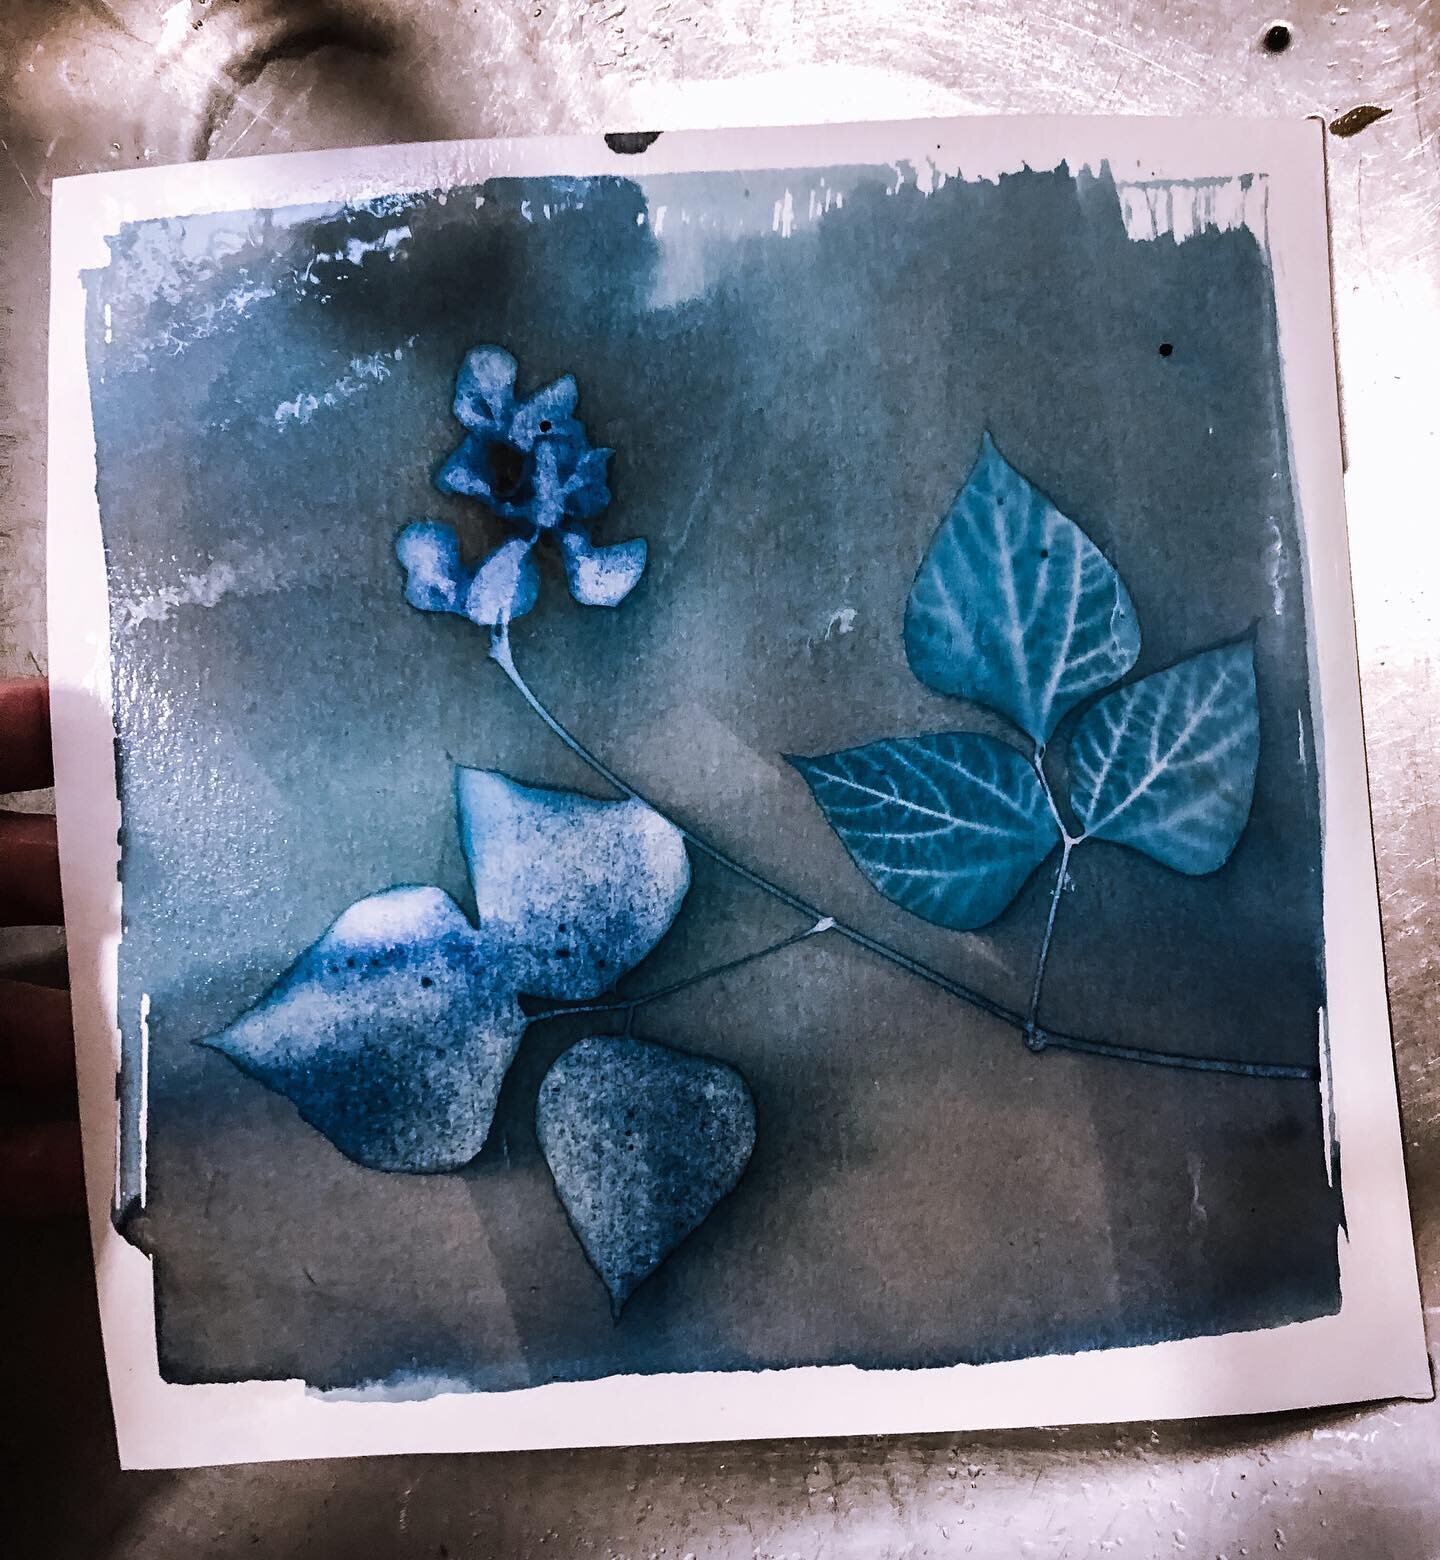 Hyacinth cyanotype print attempt #475.
&ldquo;Notes: Failed. 30 minutes exposed under UV light.
Would have worked if I had flatten all parts as well as set of leaves on right. So close.&rdquo;

I am so lucky to have the opportunity to fail over and o